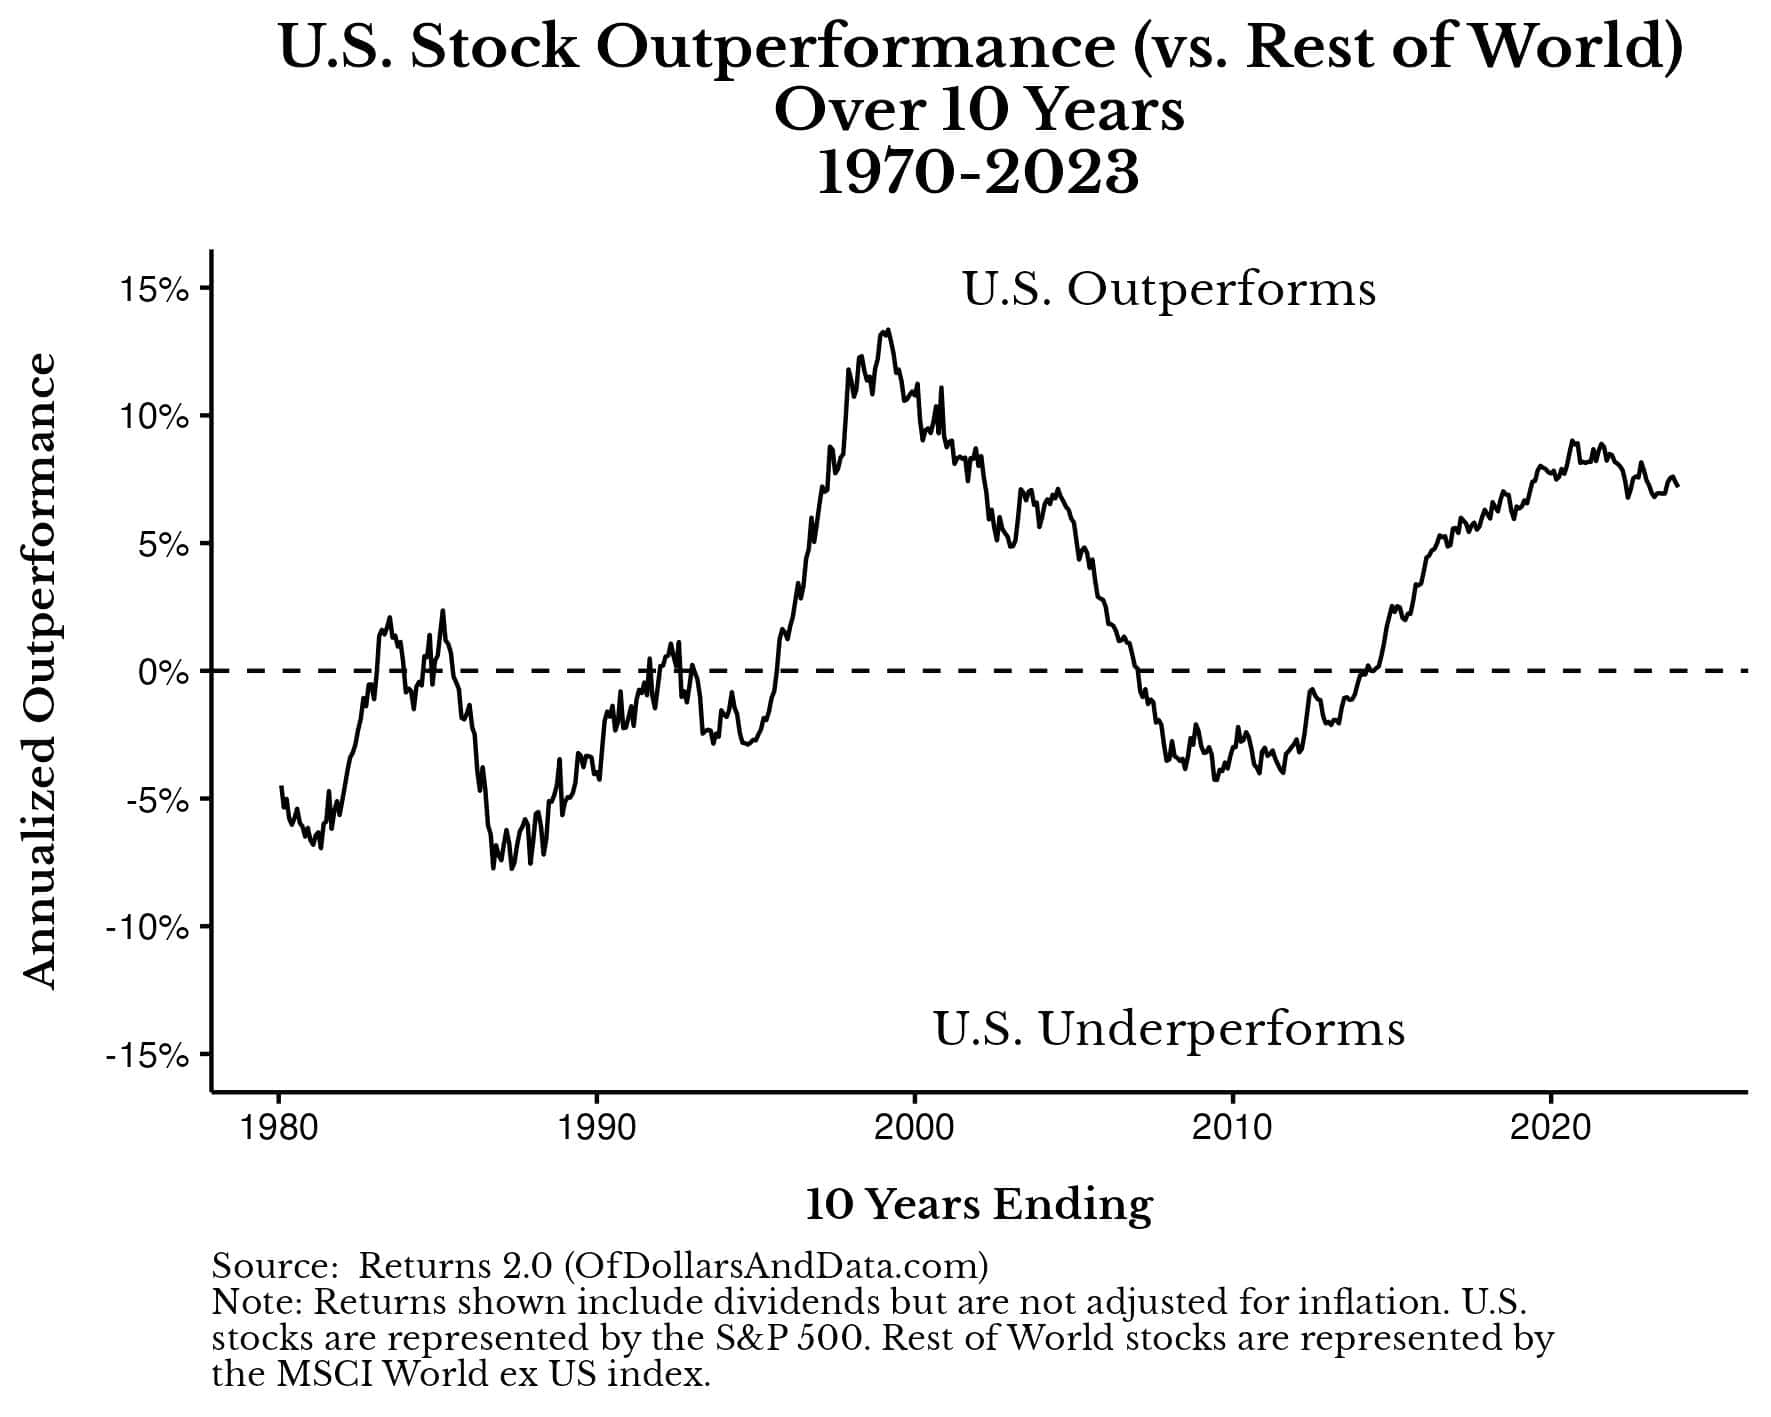 U.S. stocks vs. Rest of World stocks rolling 10-year annualized outperformance from 1970-2023.